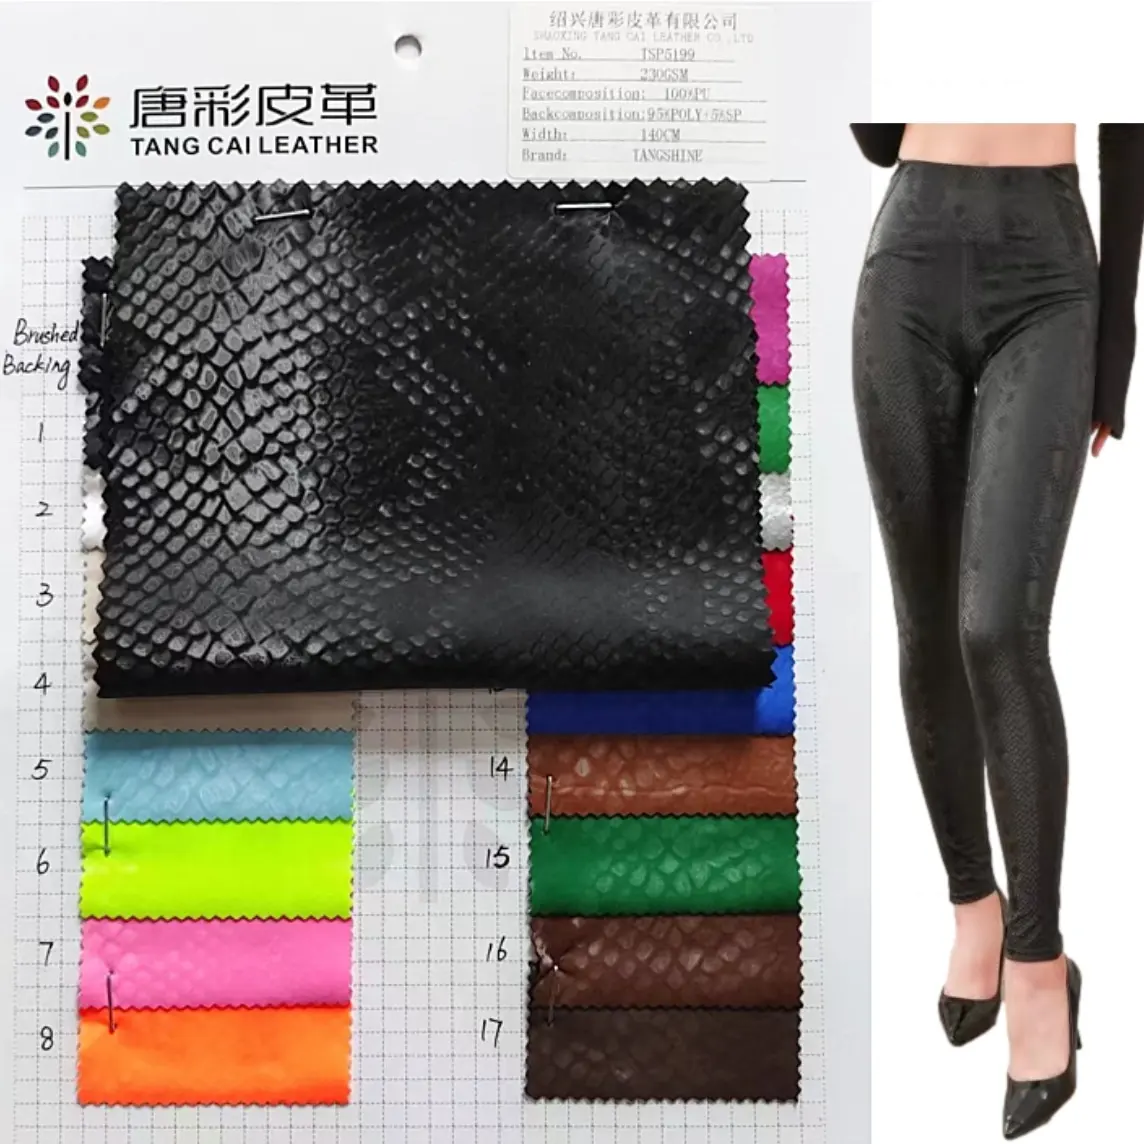 Latest Fashion 4 Way Stretch Leather Snake Grain PU Leather Fabric for Garment and Skirt